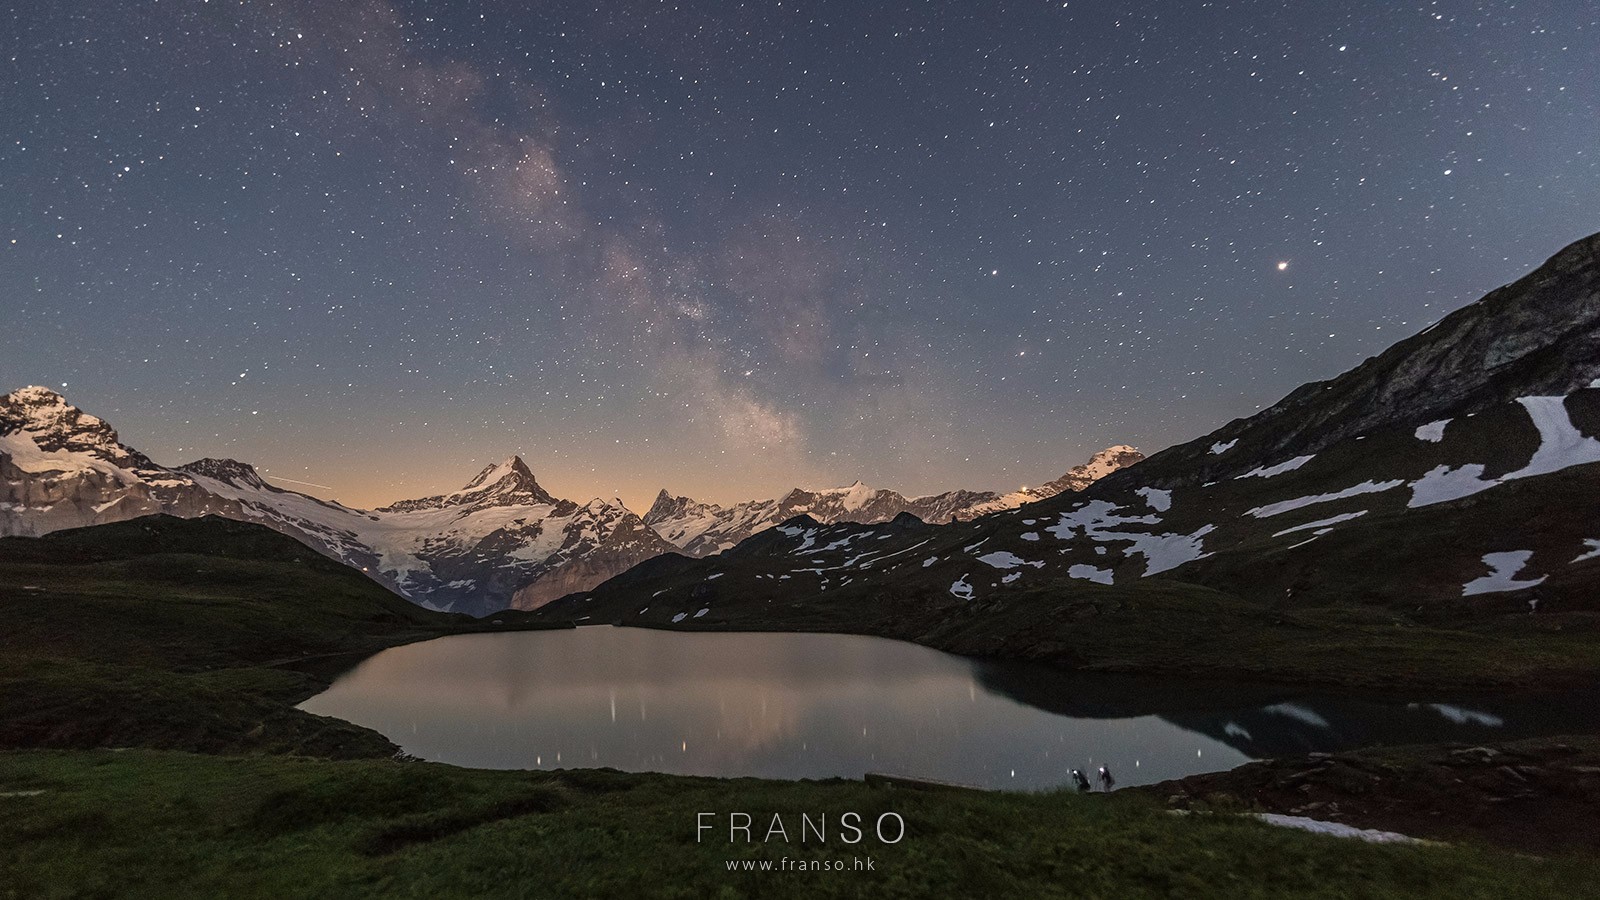 Starscape and Milkyway |  | After sunset | Bachalpsee, Berner Oberland, Switzerland